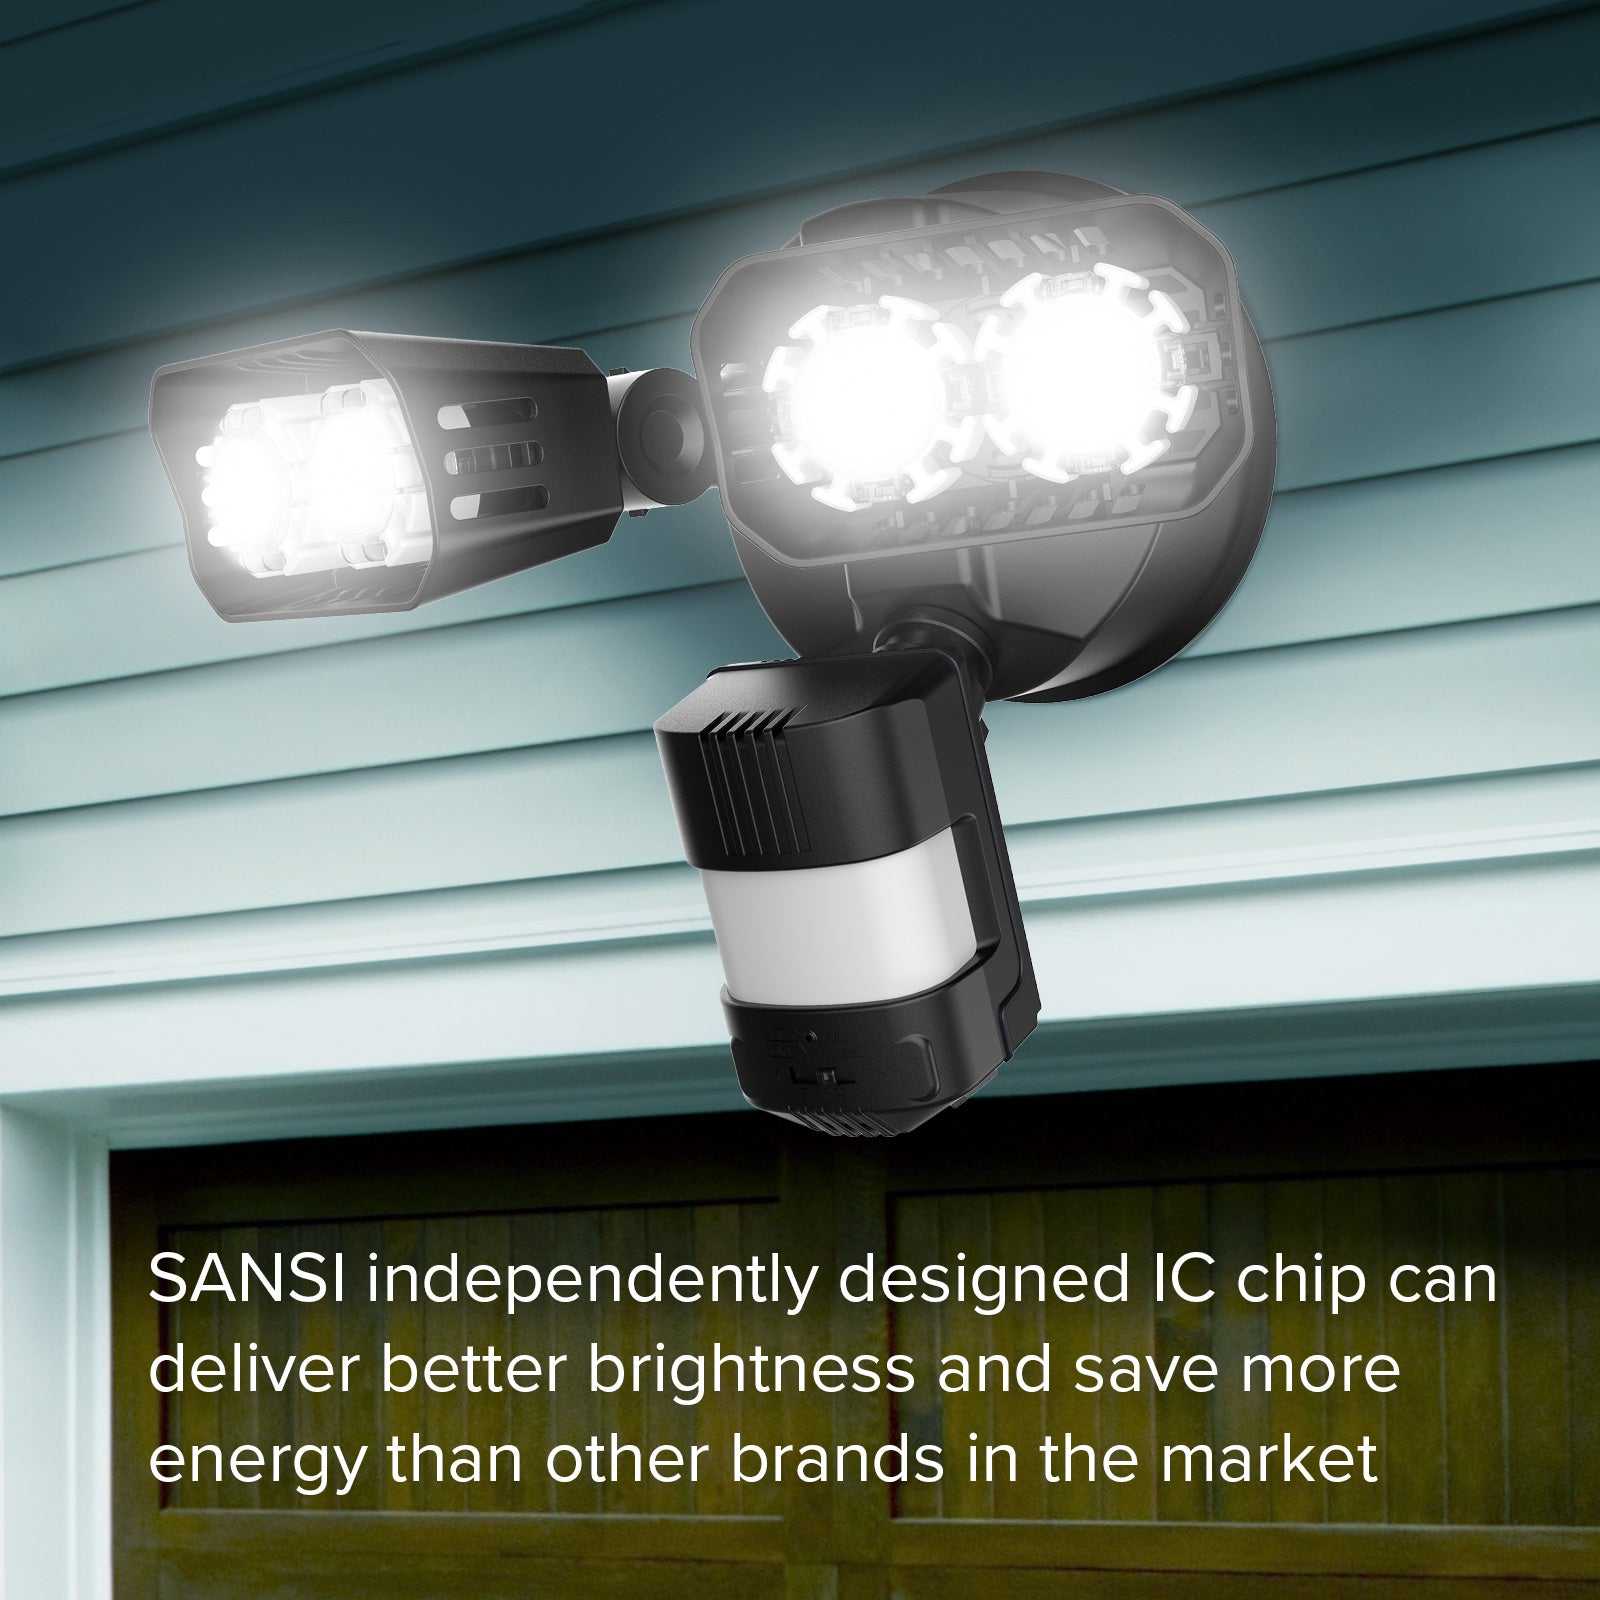 18W LED Security Light (Dusk to Dawn & Motion Sensor) adopt the drive power IC chip independently designed by SANSI, superior brightness and save more energy than other brands in the market